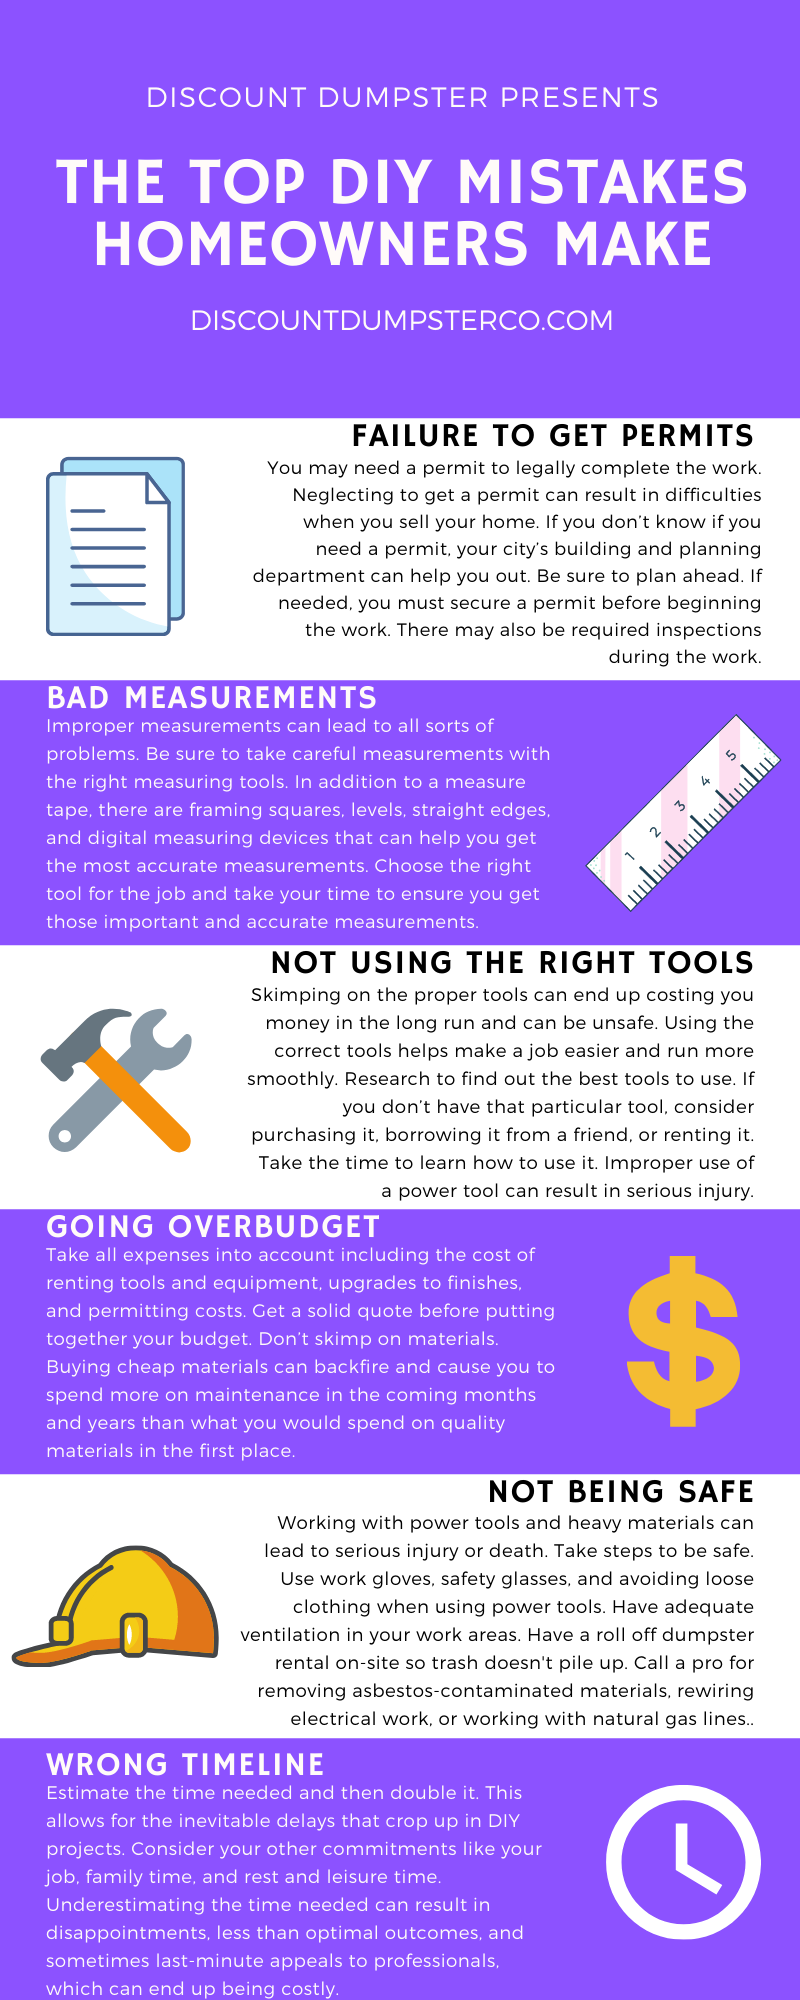 An infographic detailing top DIY mistakes homeowners make